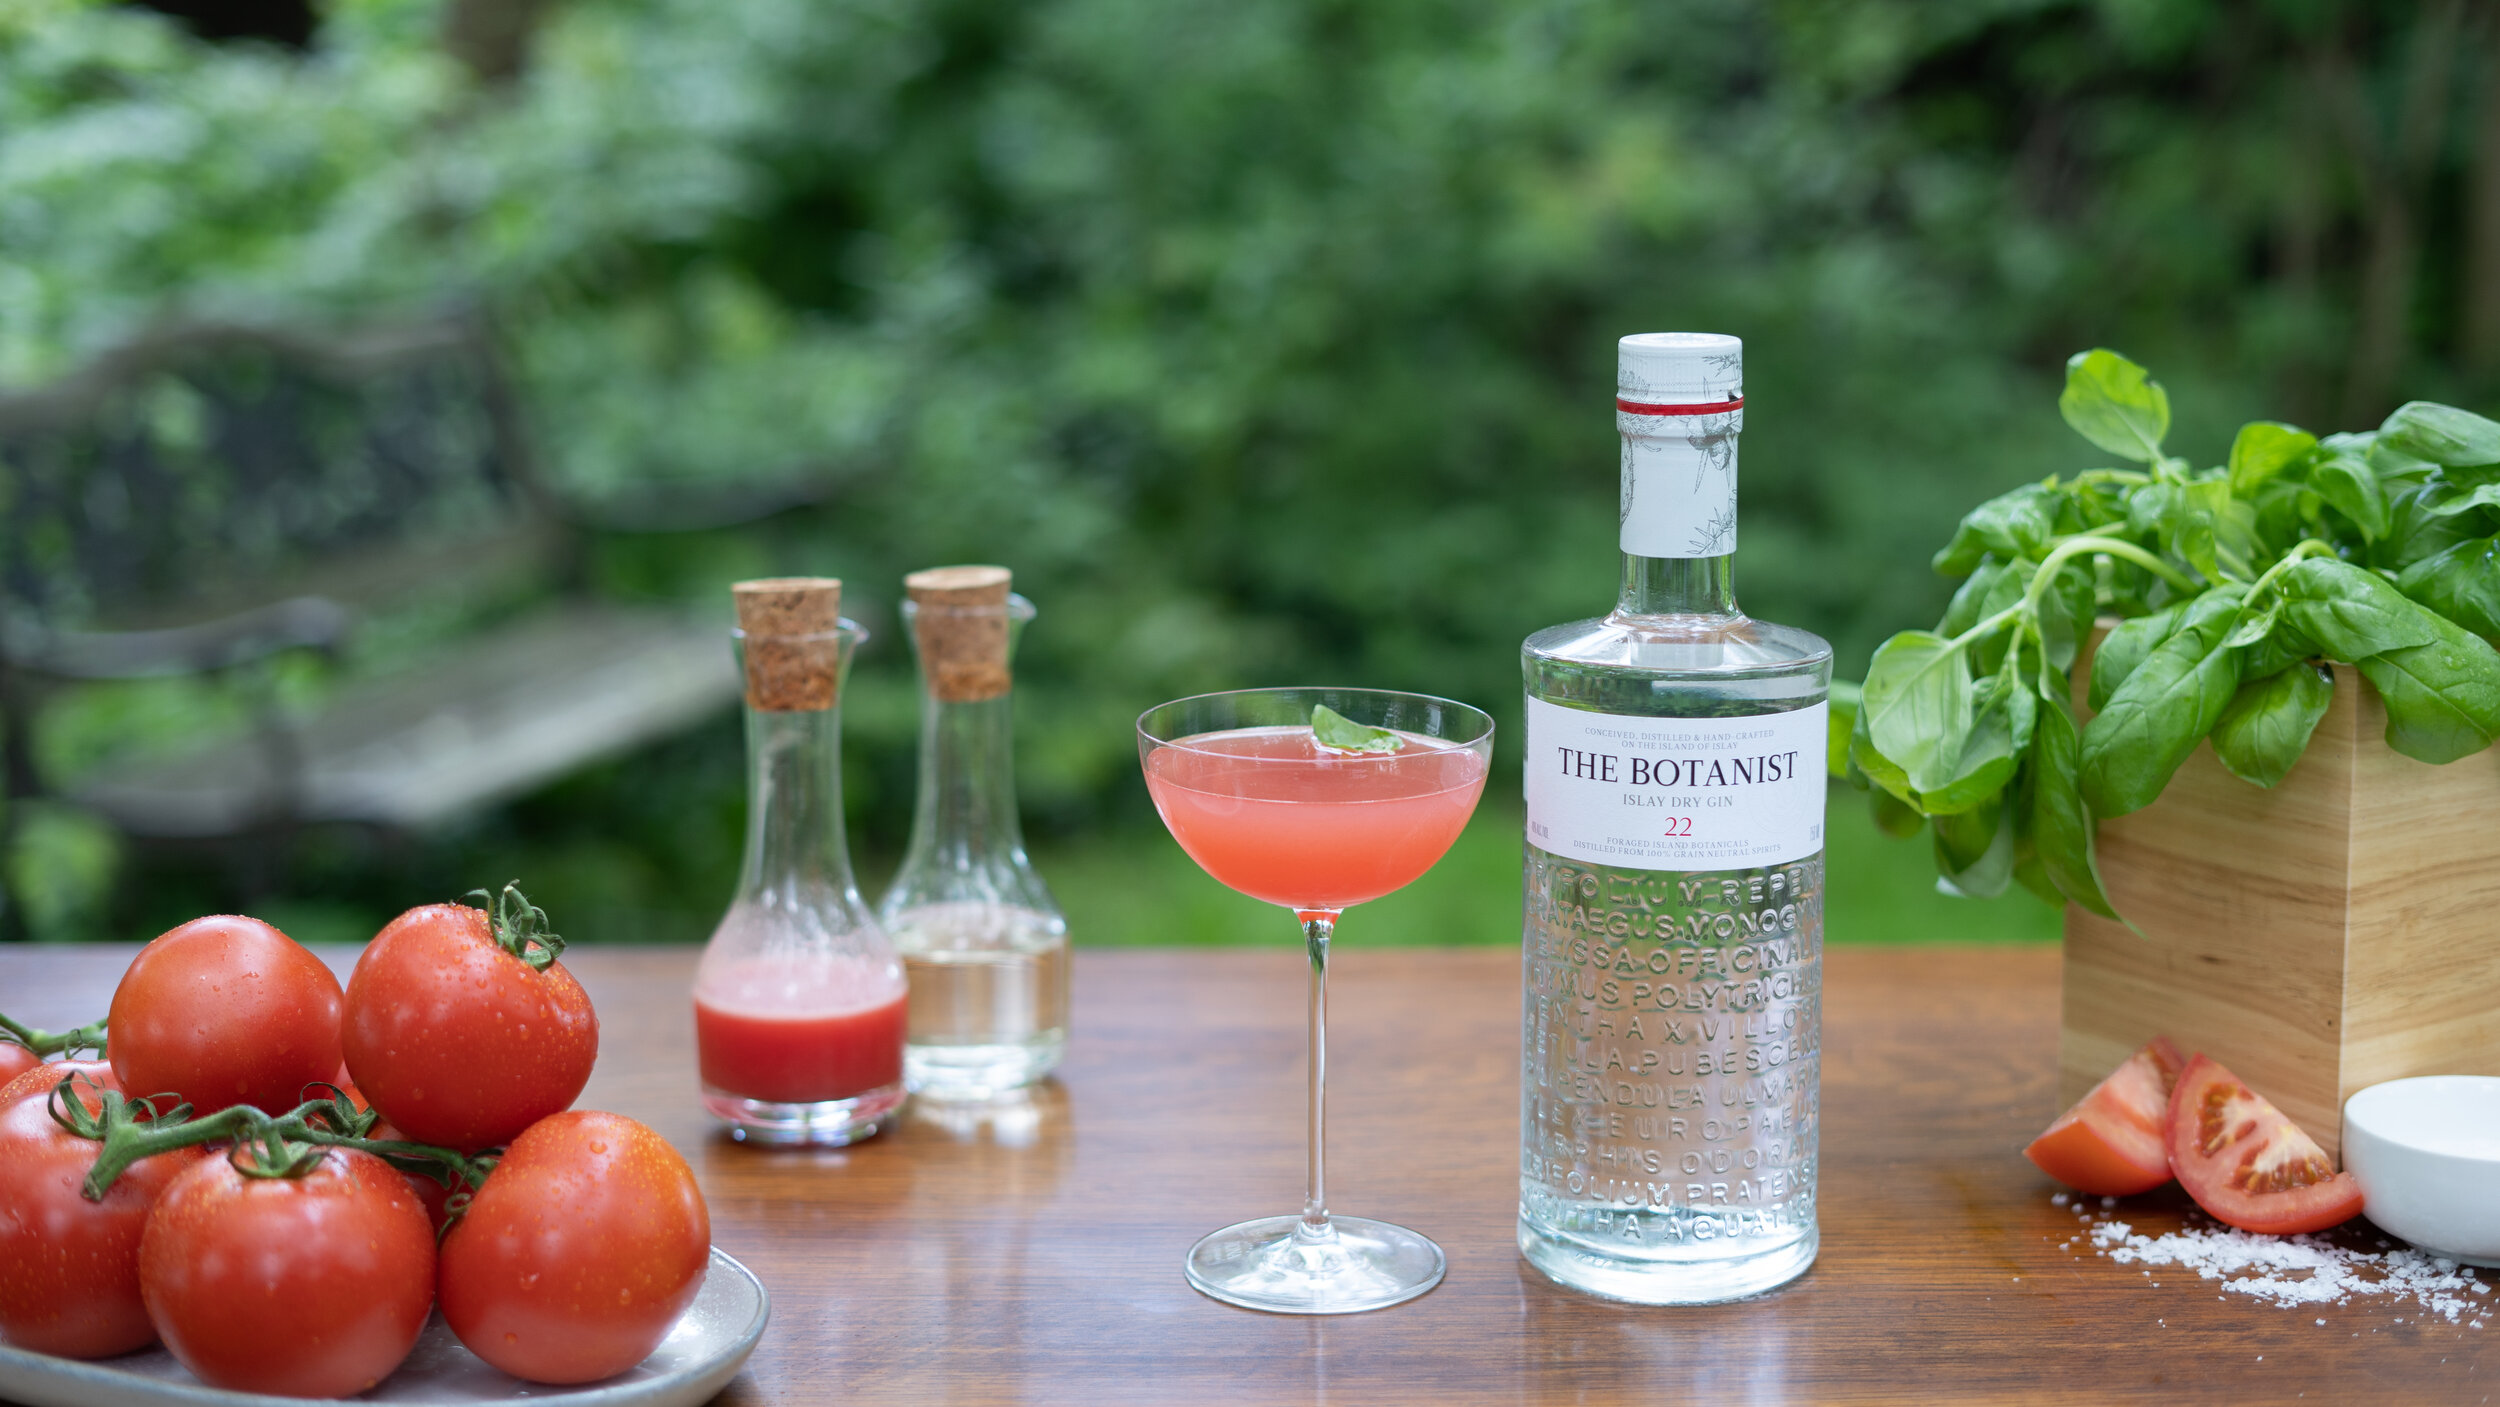 RIGHT Gin + Top of the Morning Gin Cocktail Kit, Order Online